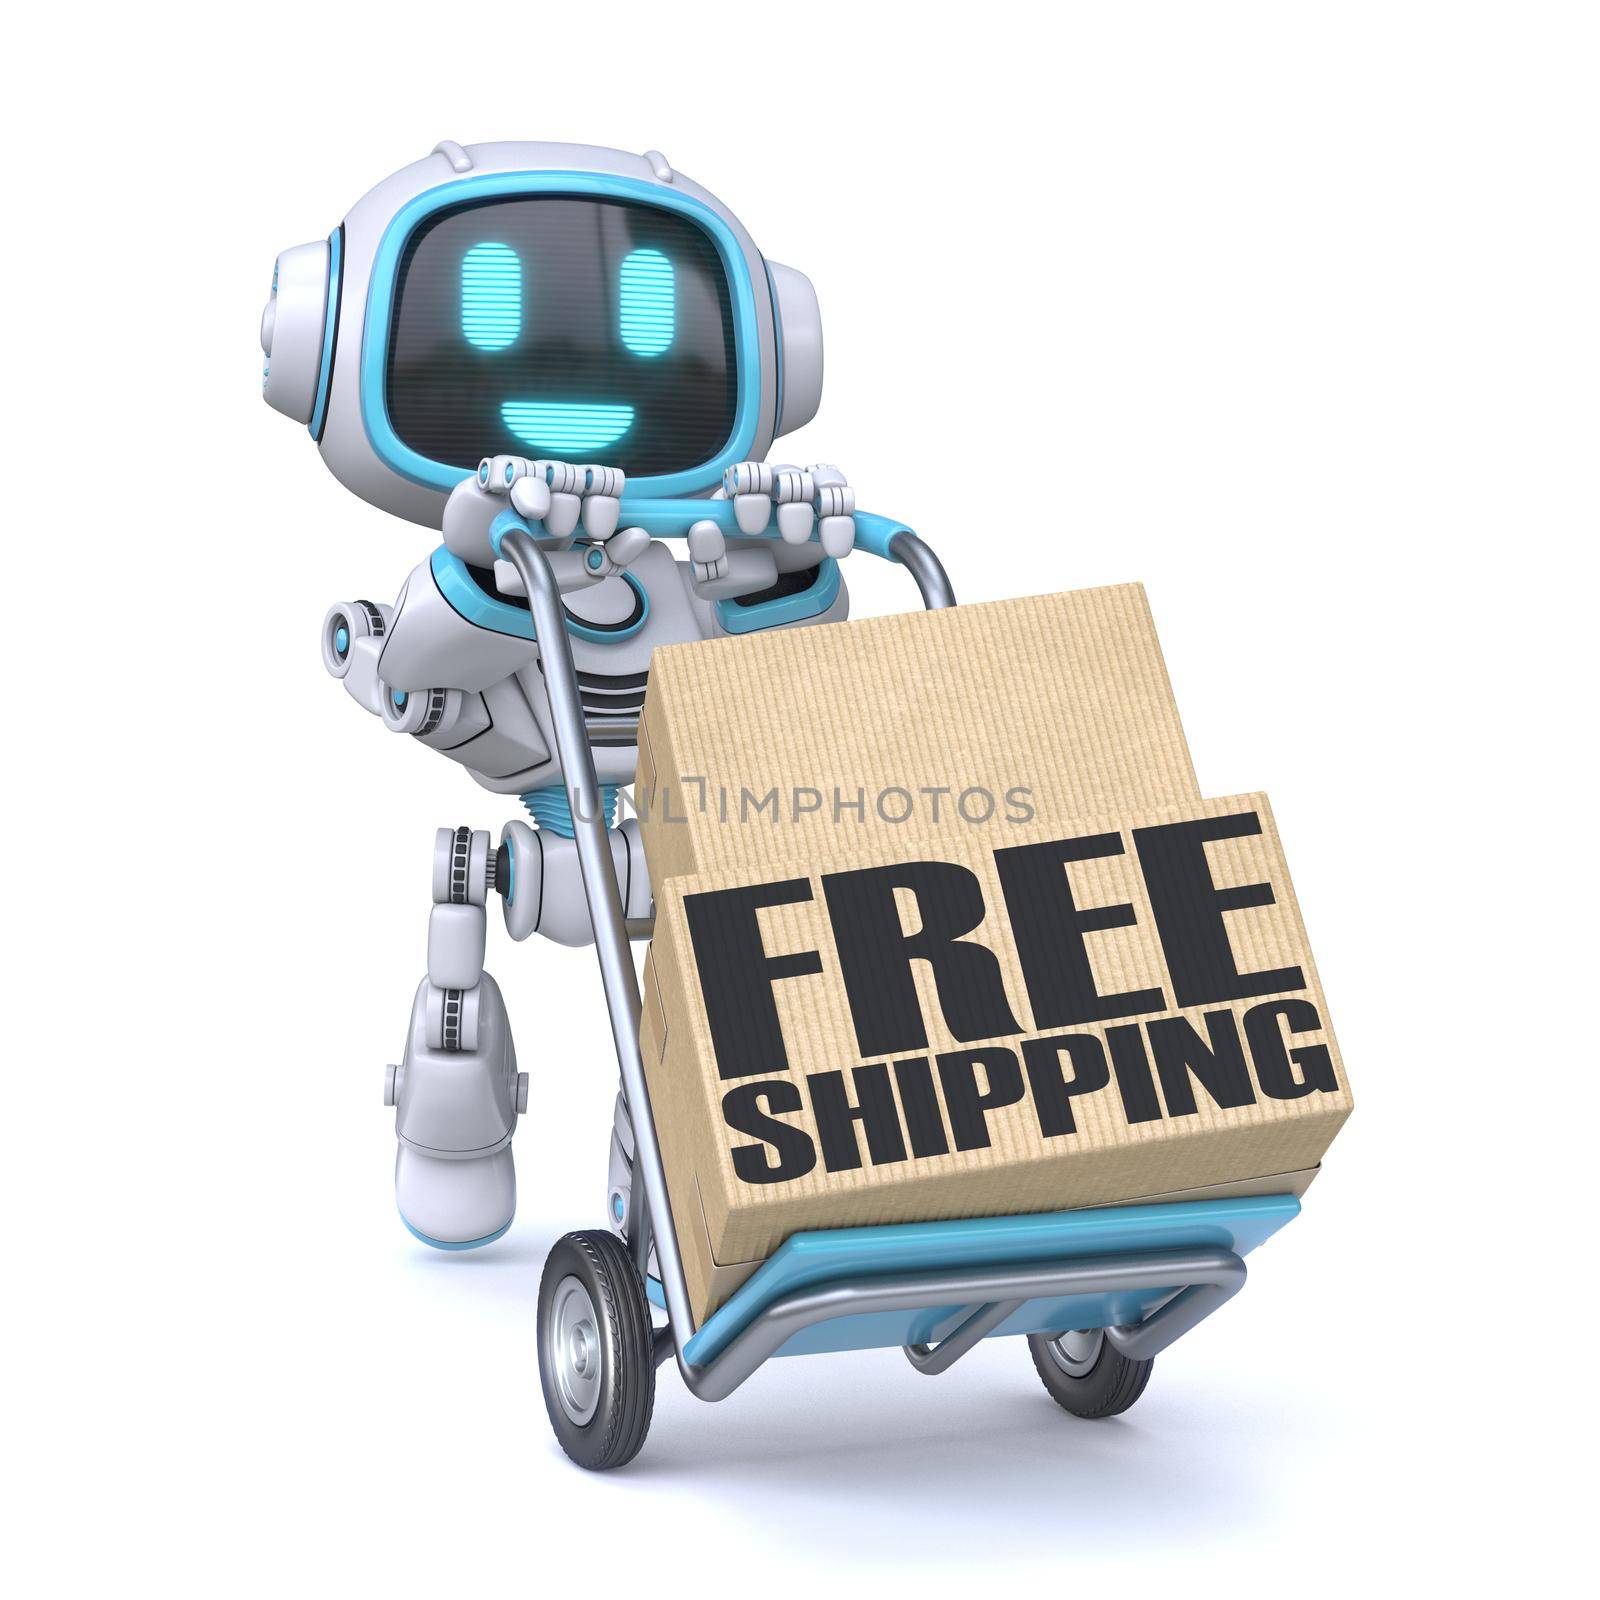 Cute blue robot with hand truck Free shipping concept Front view 3D rendering illustration isolated on white background